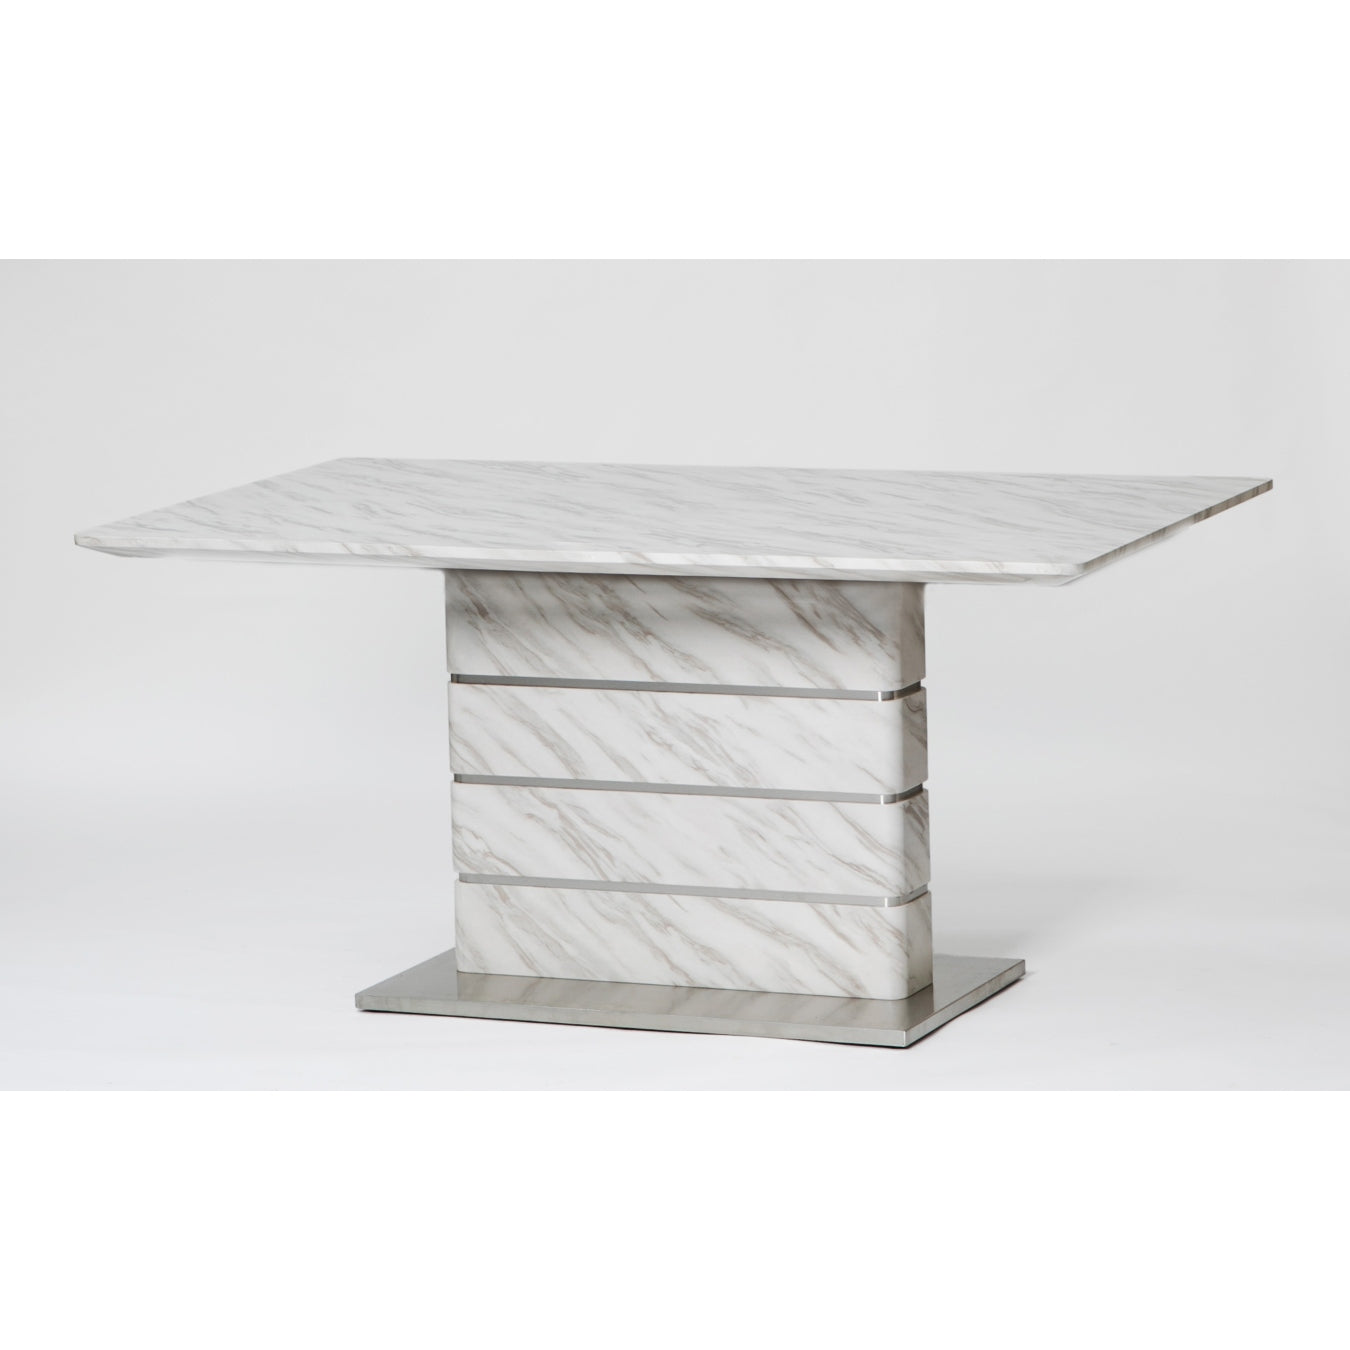 Aina White Marble Pedestal Dining Table